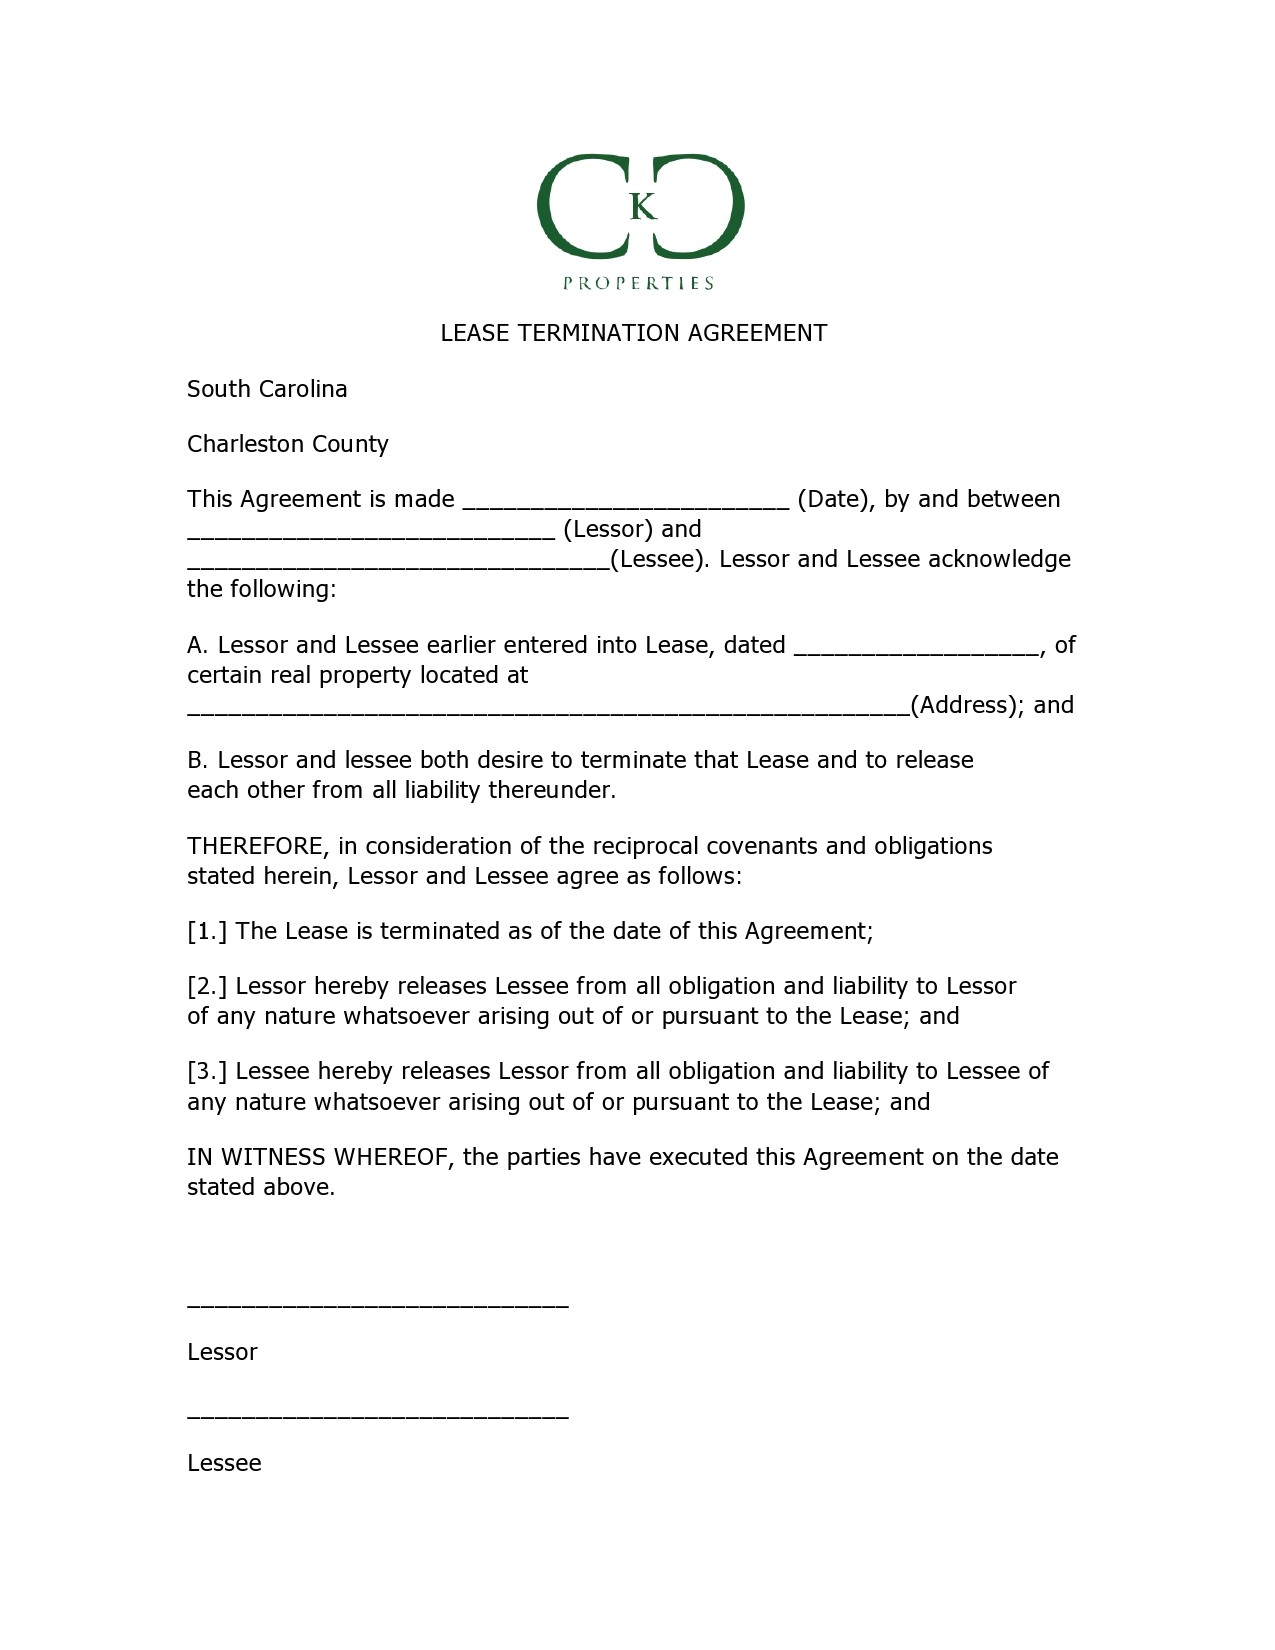 Free lease termination agreement 40